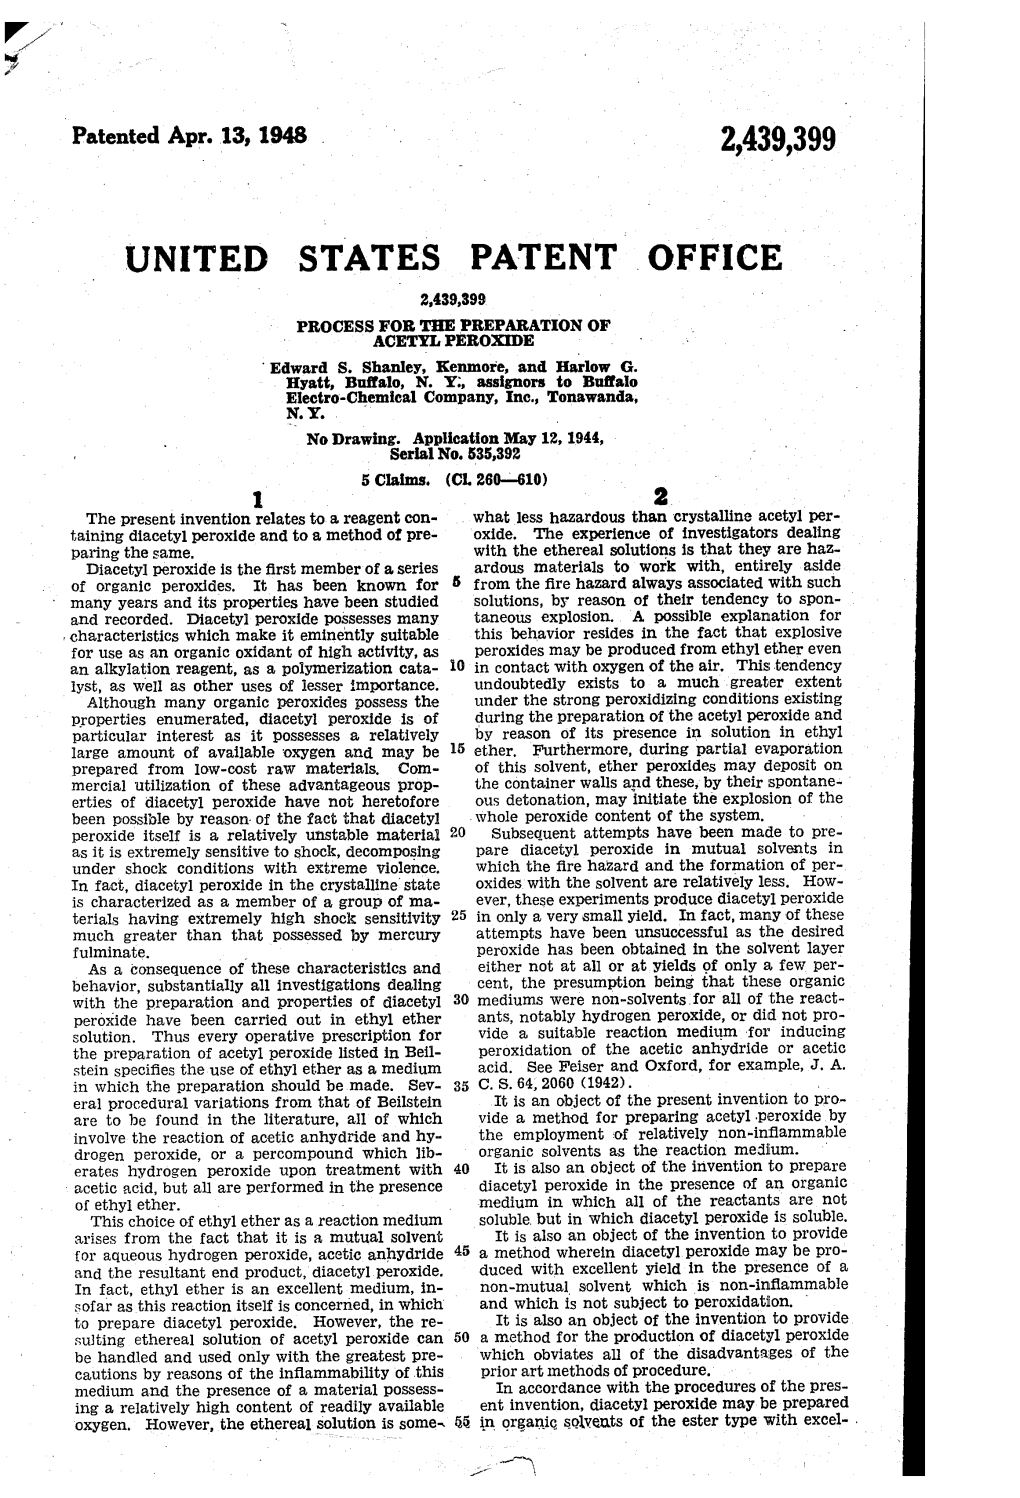 UNITED STATES PATENT of FICE PROCESS for the PREPARATION of - ACETY PEROXDE Edward S